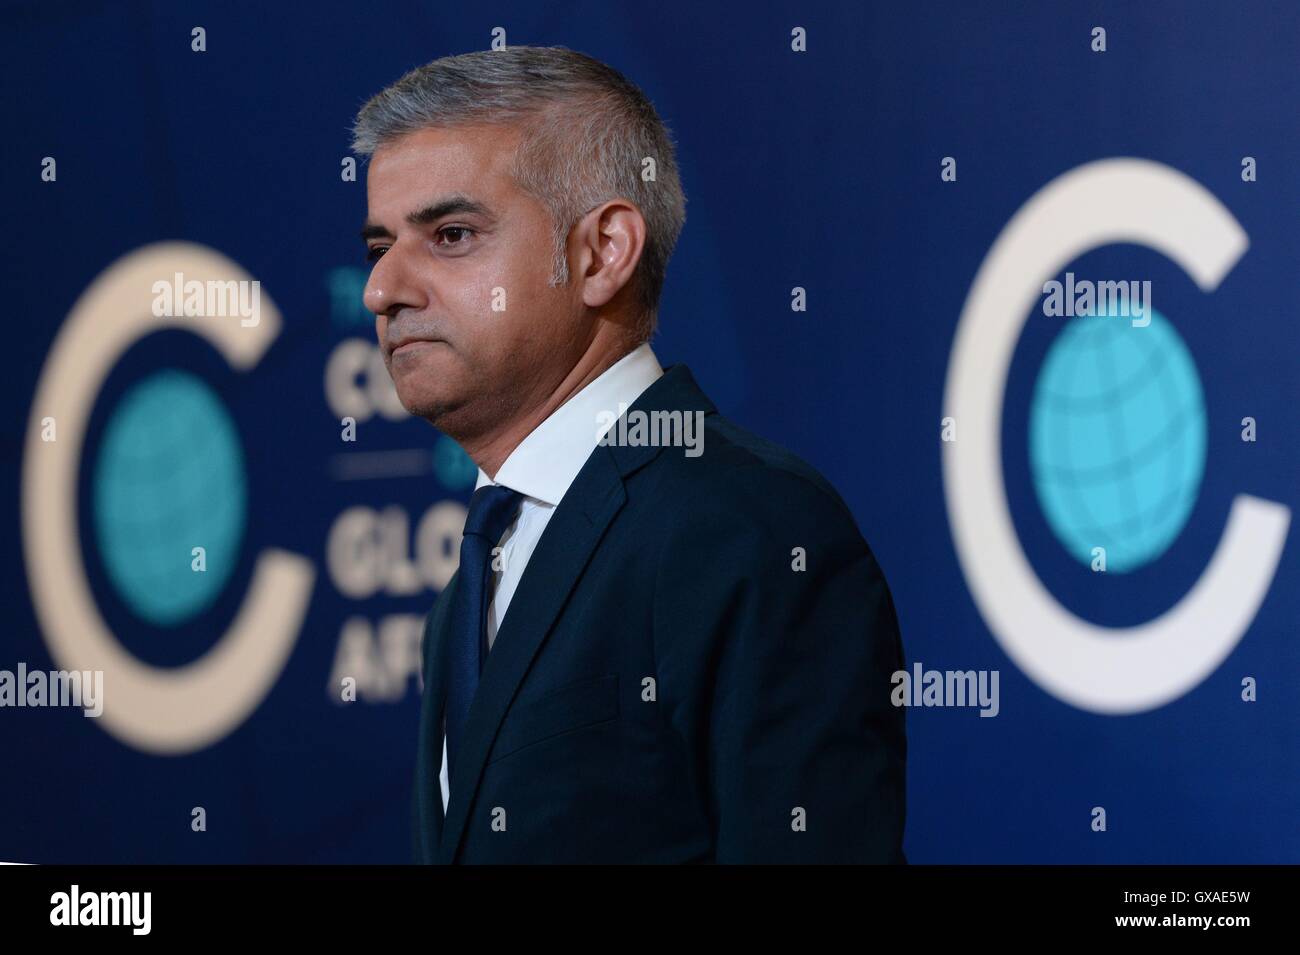 London Mayor Sadiq Khan makes a keynote speech to the Chicago Council for Global Affairs about social integration. The mayor is in Chicago to meet his counterpart, Rahm Emanuel, and is part of a five day visit to the United States. Stock Photo